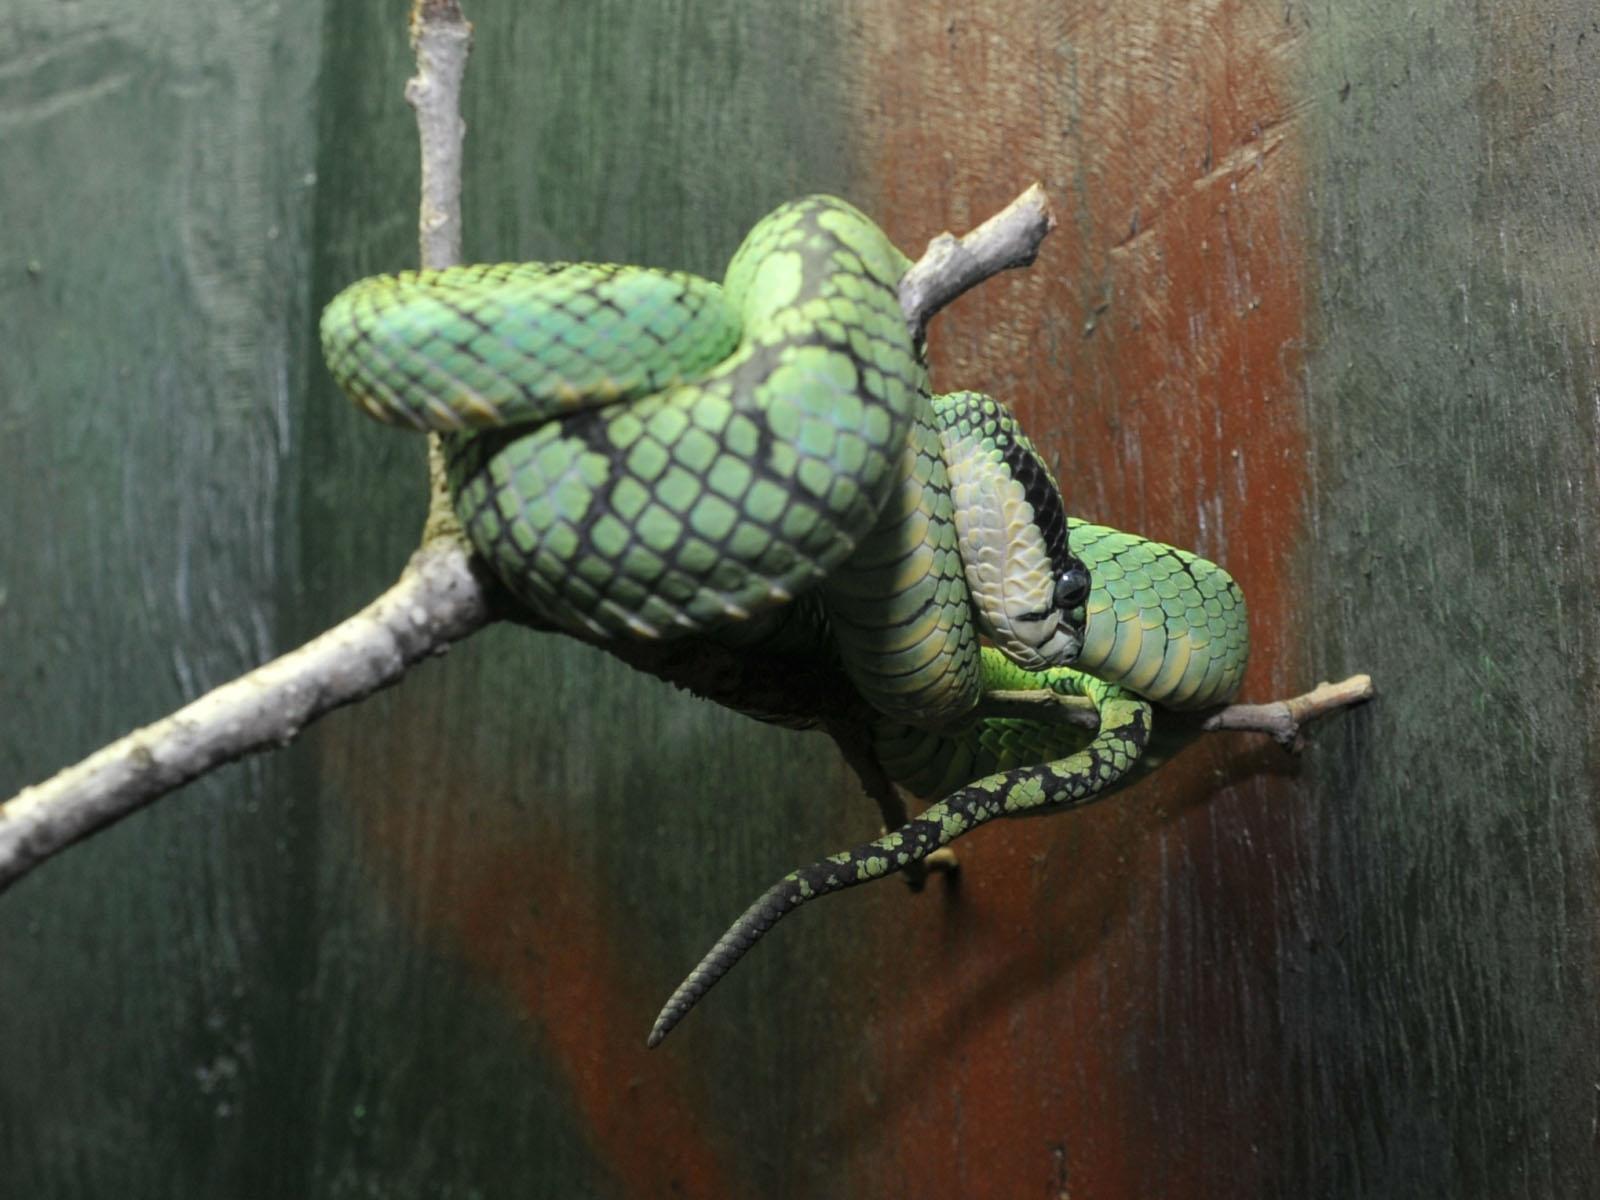 The Online Zoo Lipped Tree Viper